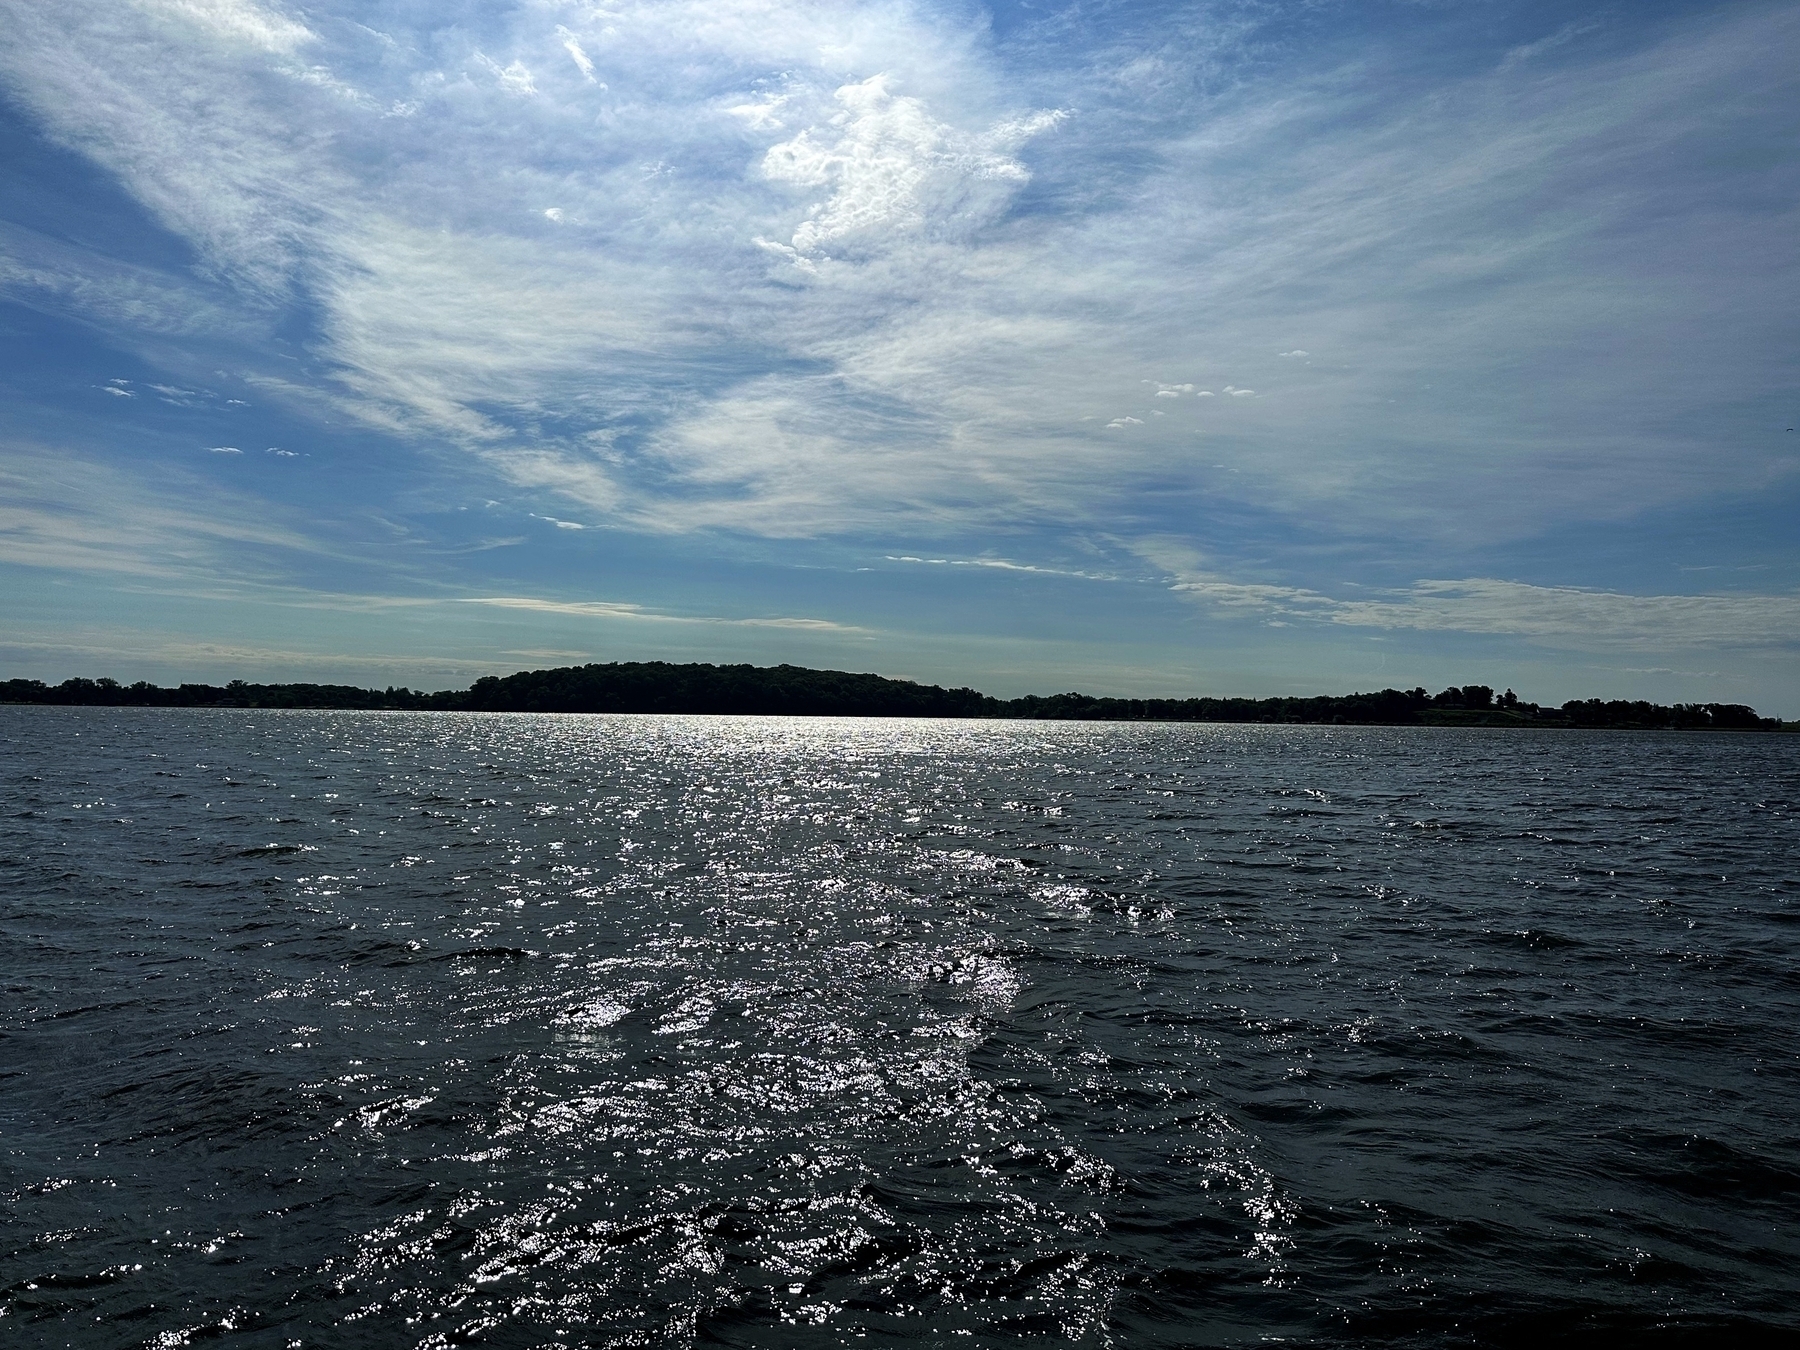 Sunlit waves sparkle on a wide body of water with distant tree-covered land on the horizon under a partly cloudy blue sky.